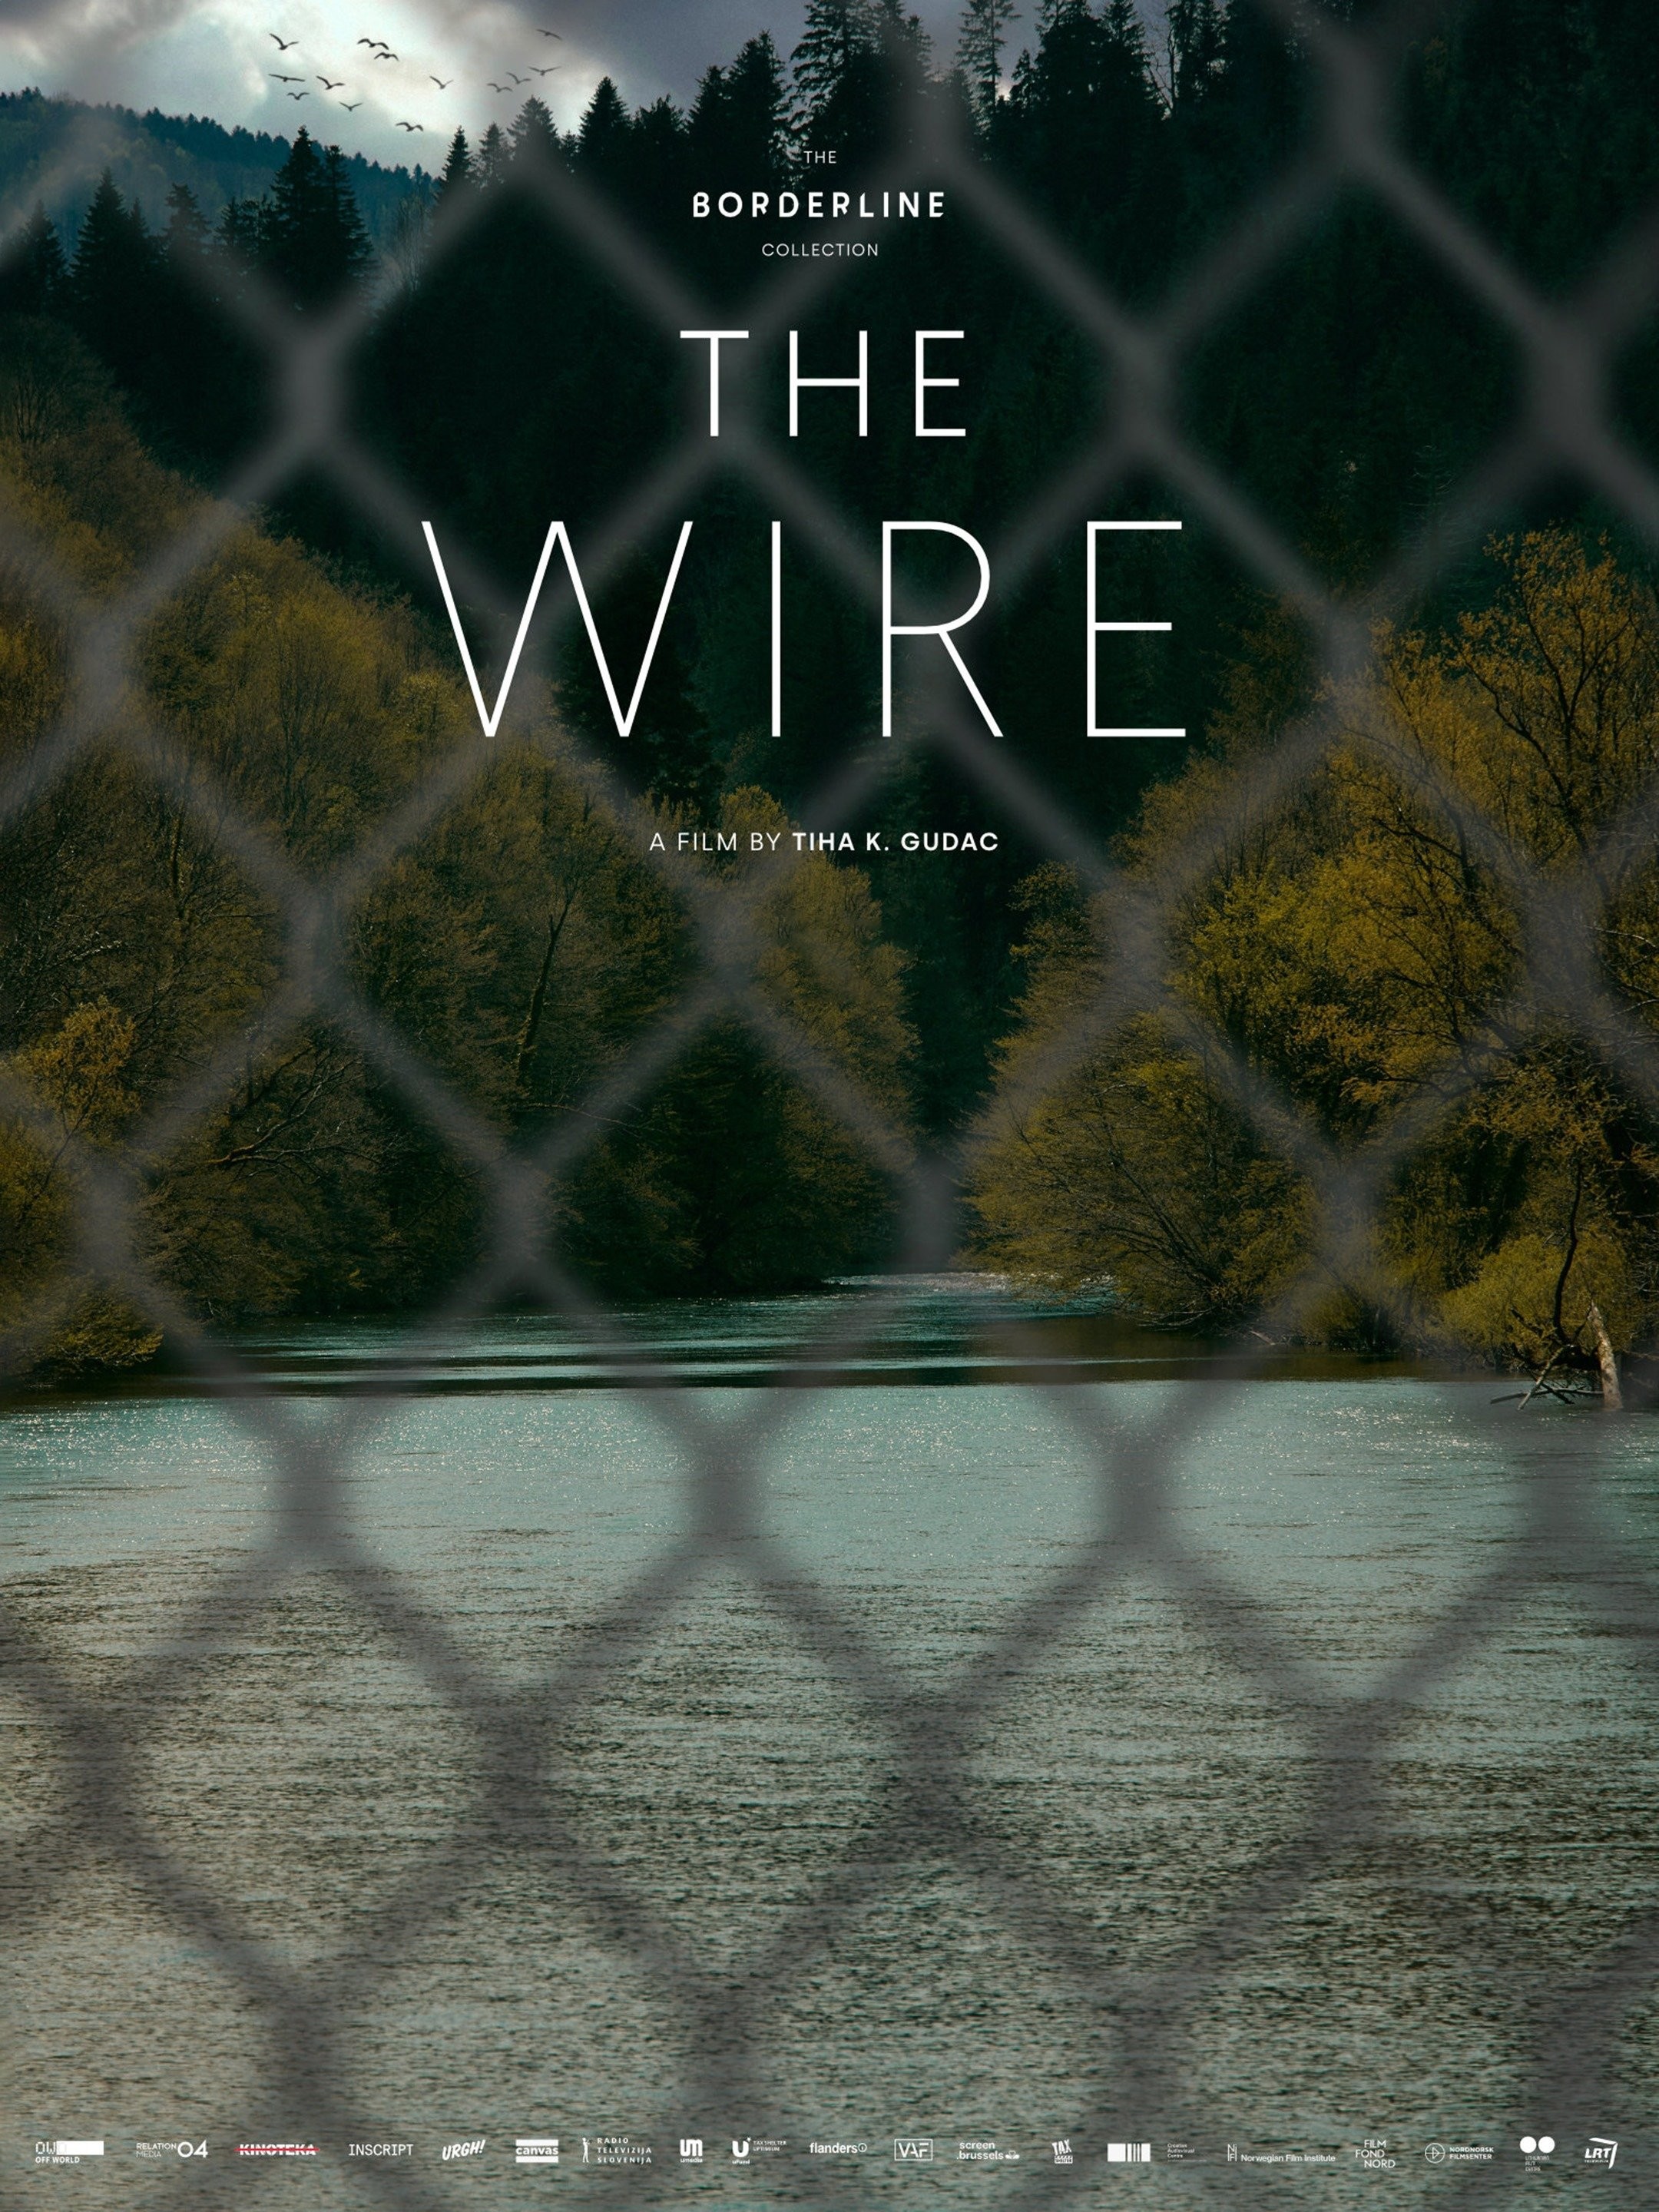 Nobody Quits 'The Wire': How TV's Greatest Drama Became a Family – IndieWire